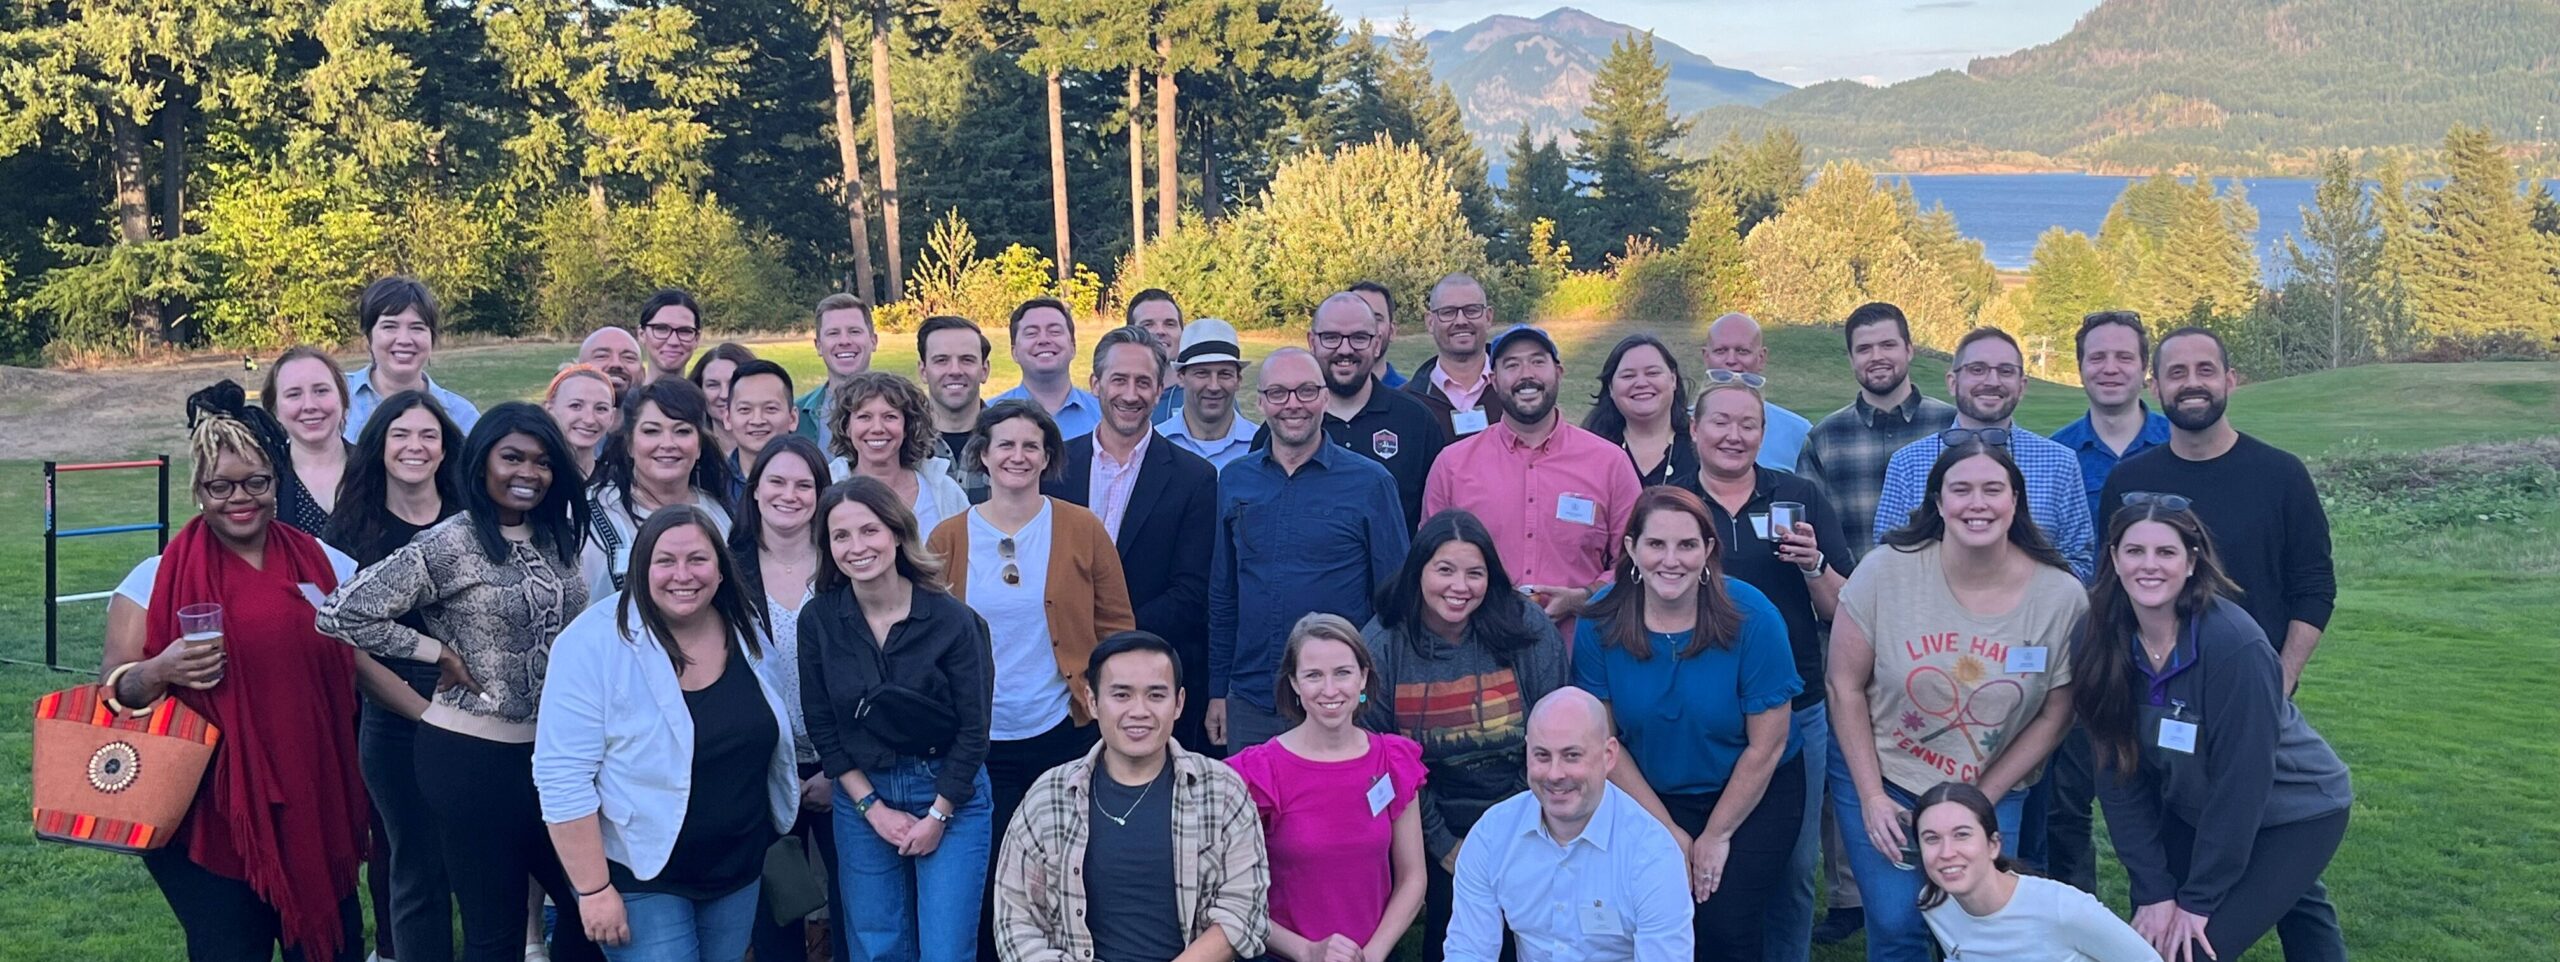 The entire Leadership Portland 2023 class smiles for a picture at Skamania lodge in Washington